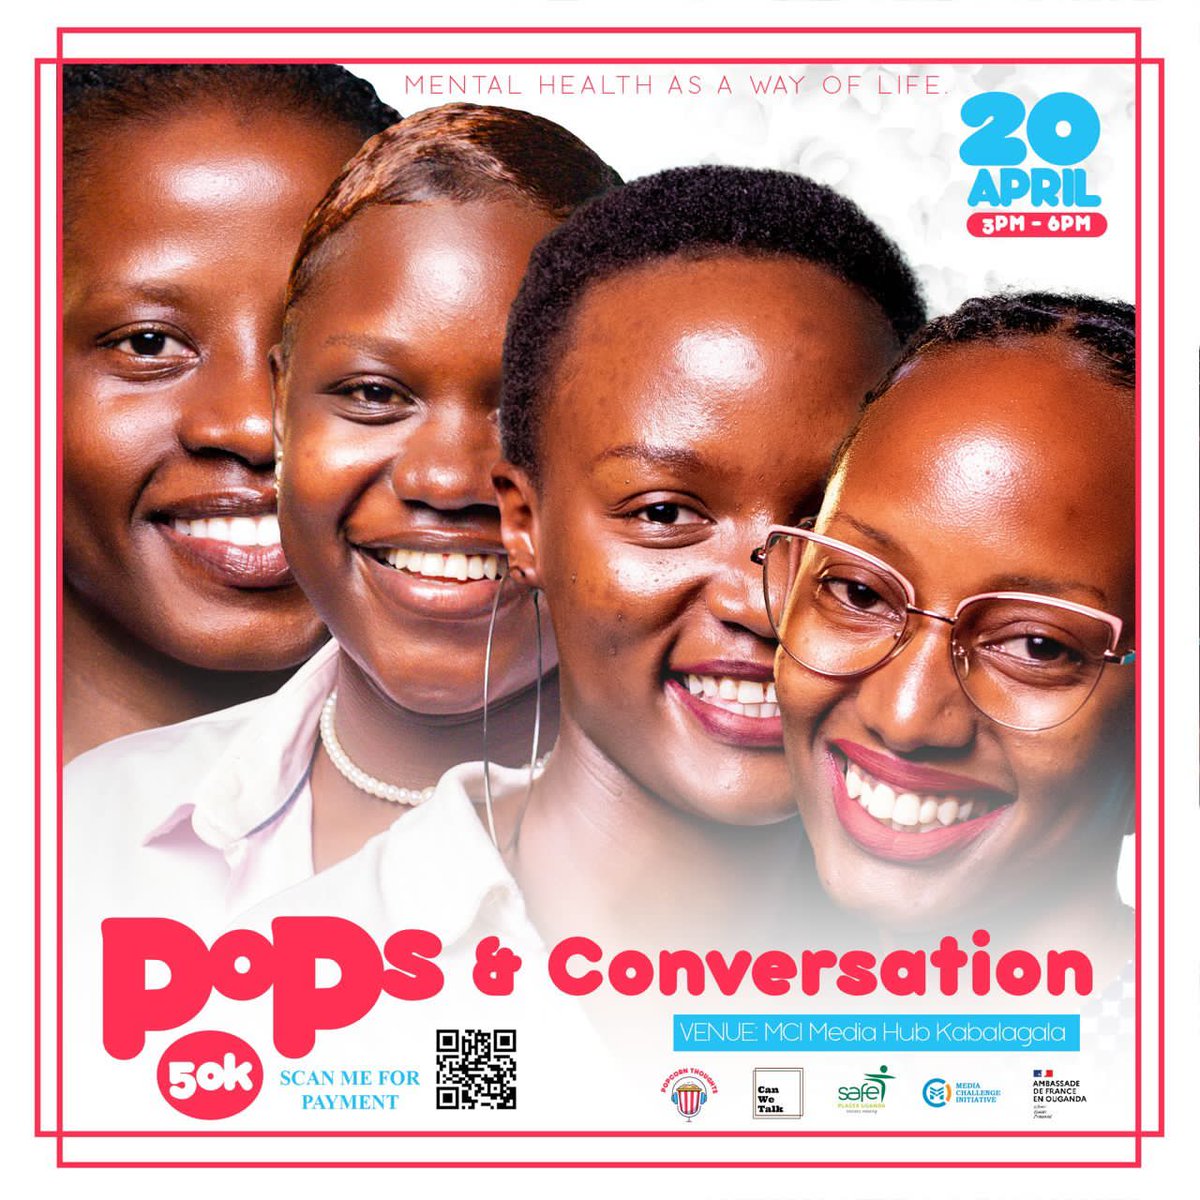 Join us this Saturday, April 20th, for a special live recording of #PopsAndConversation! Our very own @angellalawino will also be there. Secure your spot for just UGX 50,000 UGX ticket.ug/pnc 📍 @mcimediahub, Tirupati Mazima Mall, ⏰ 3 - 6pm #MentalHealthAwareness